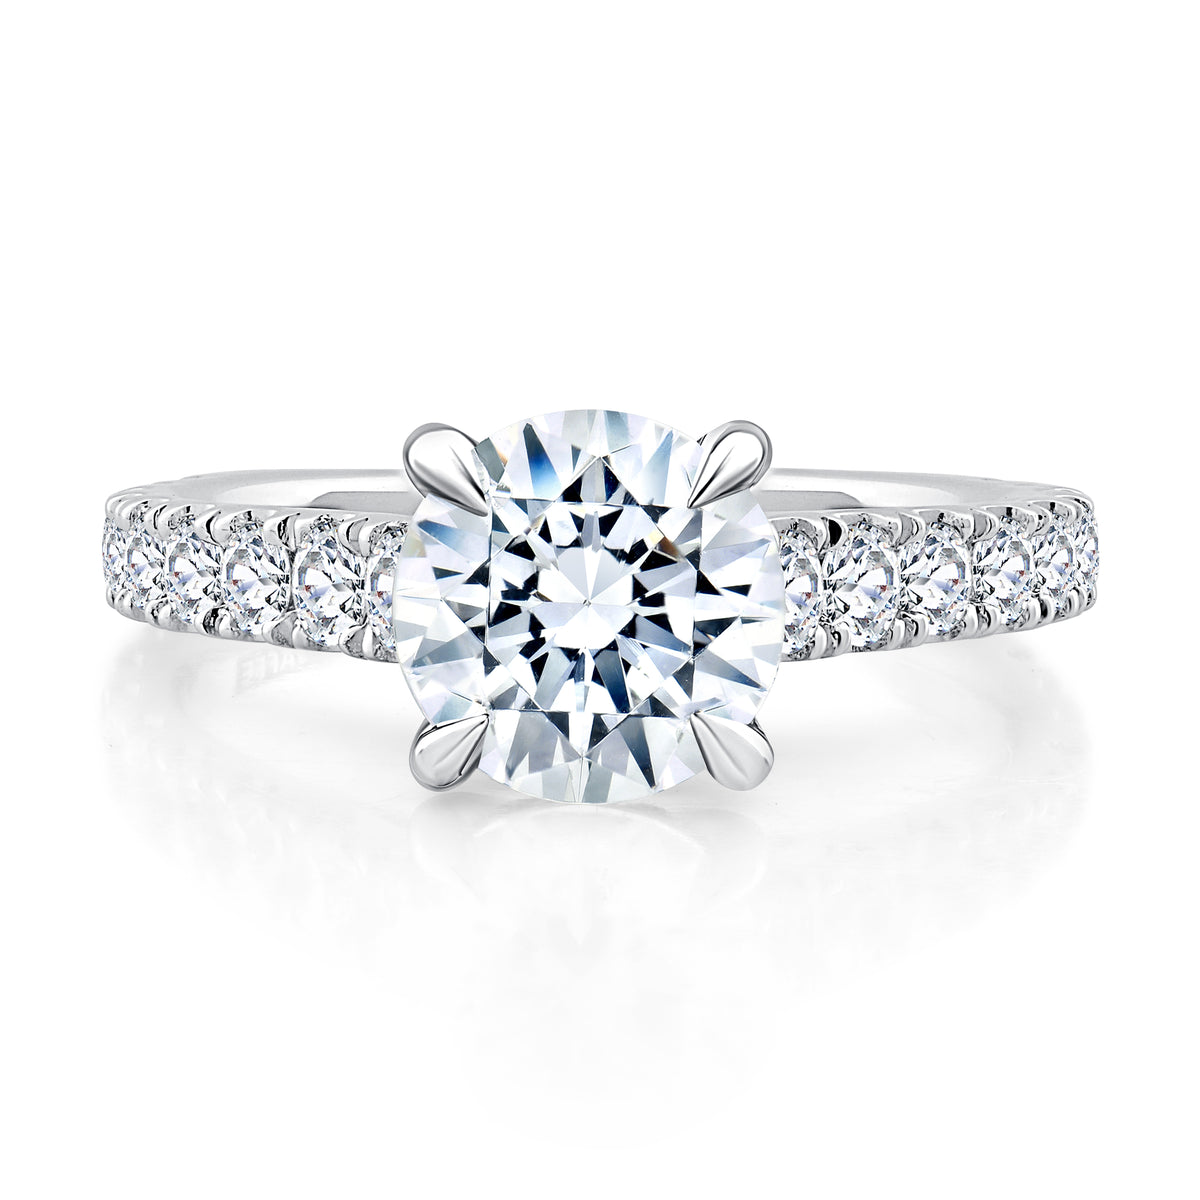 A.Jaffe Signature Diamond Peek-A-Boo Halo with Gallery Accent Engagement Ring MESRD2774/232